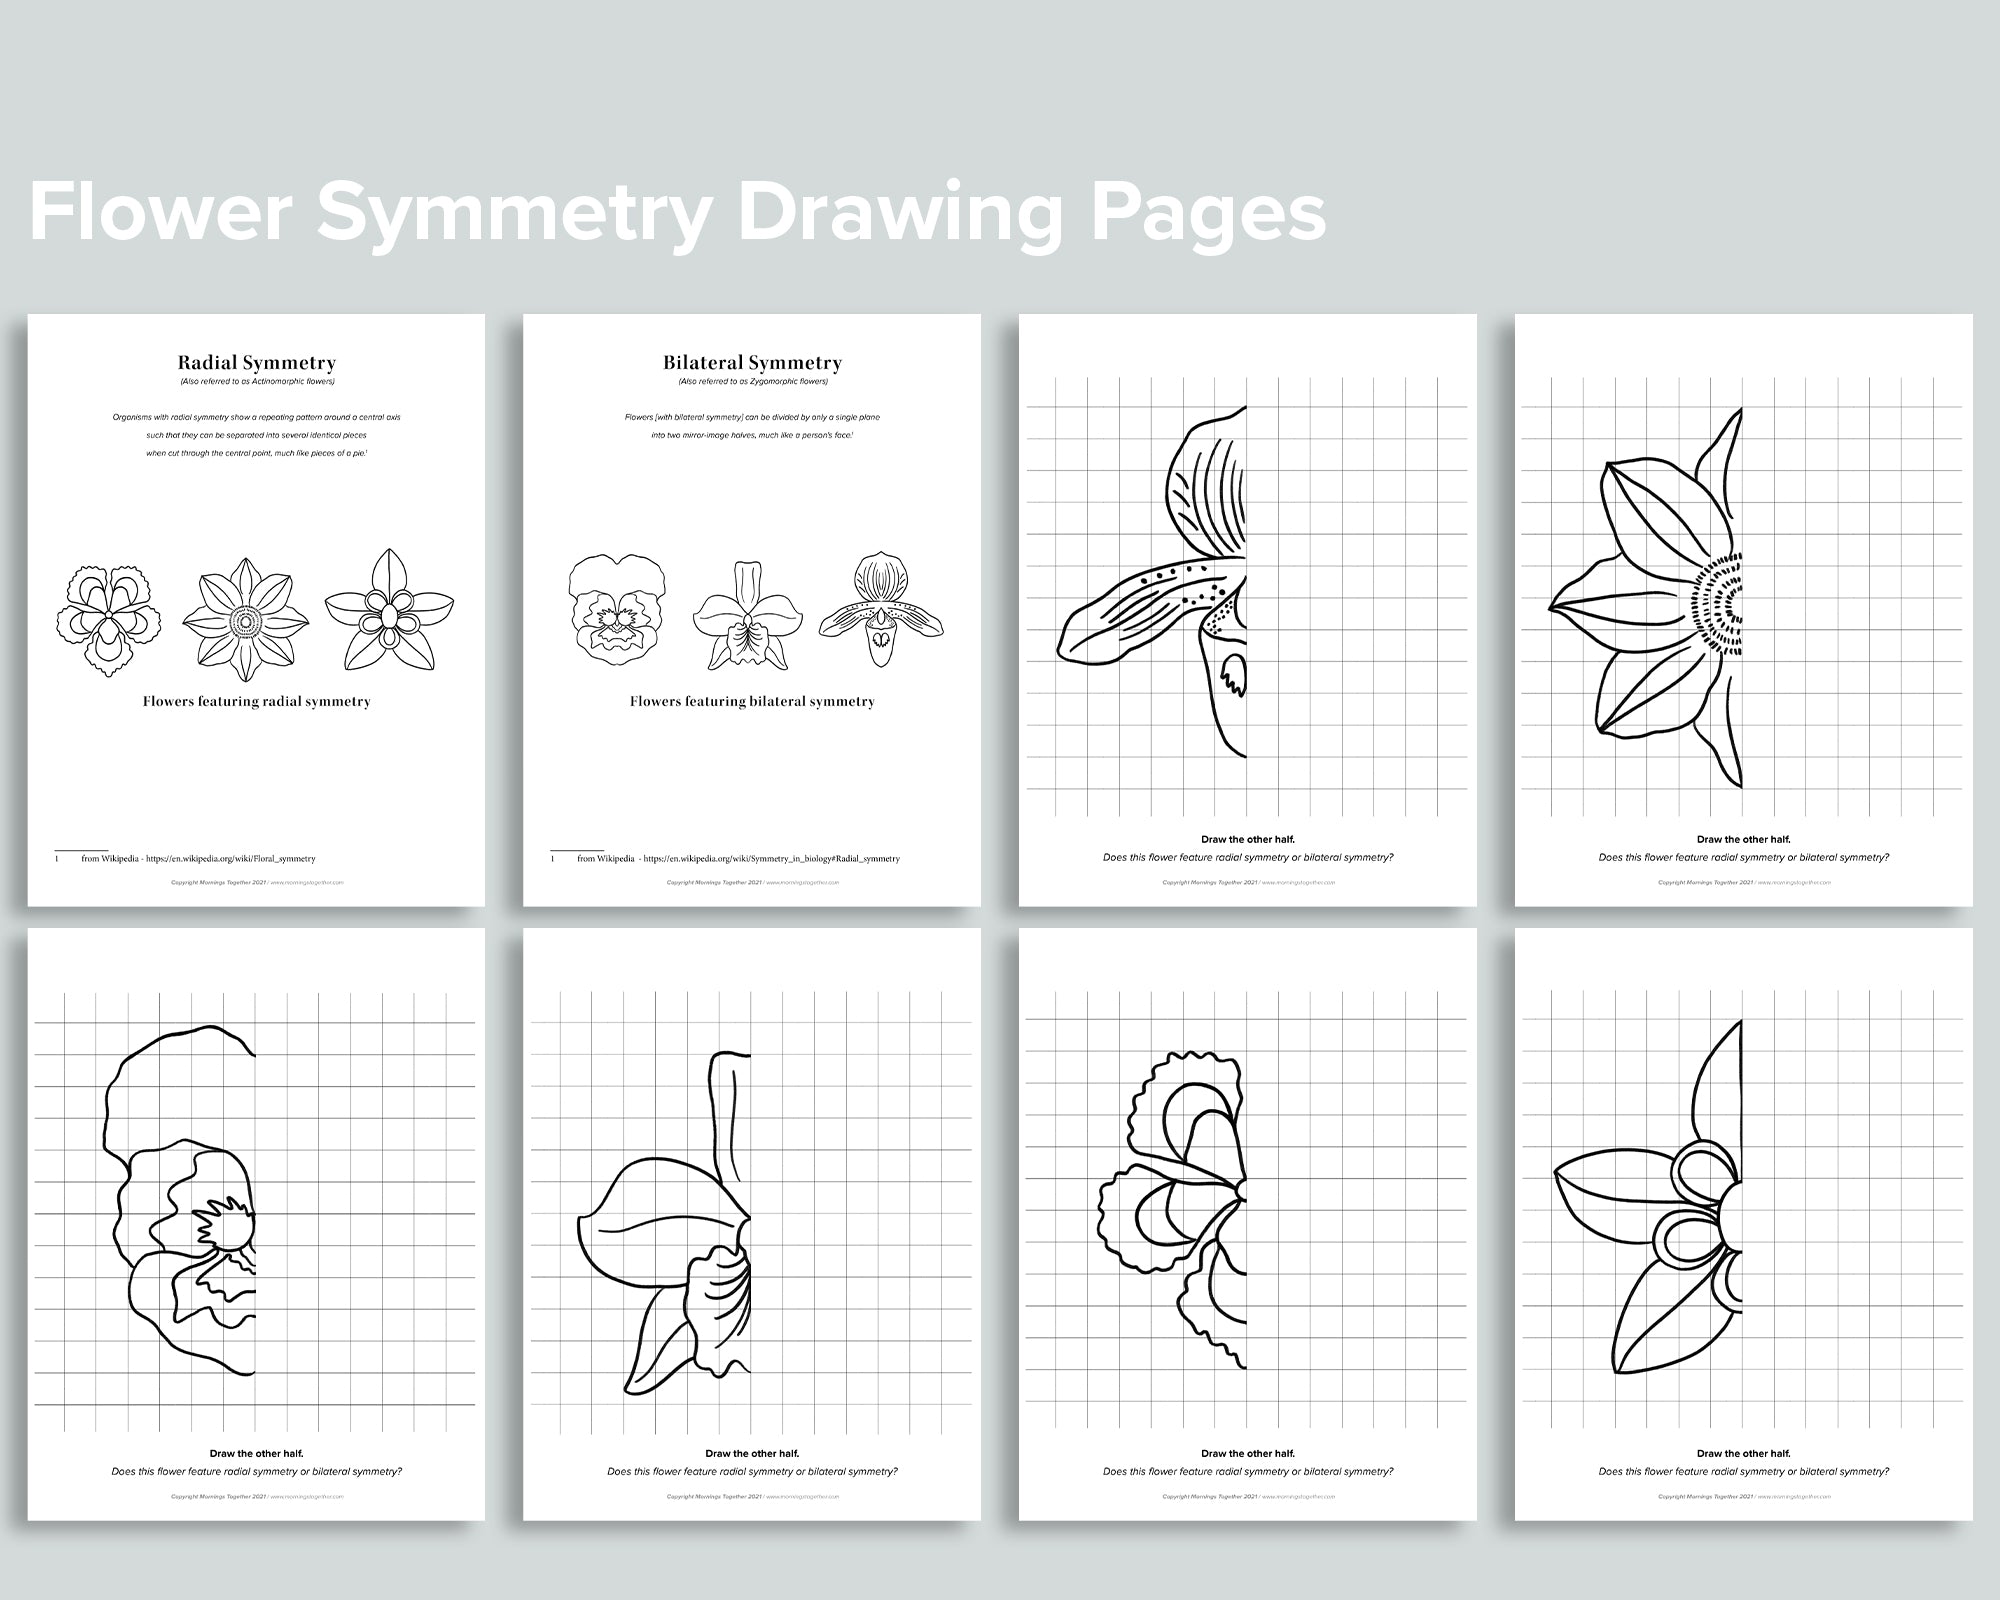 2.2.A6 Draw with Simple Symmetry (Worksheets) - Overview - Drawspace